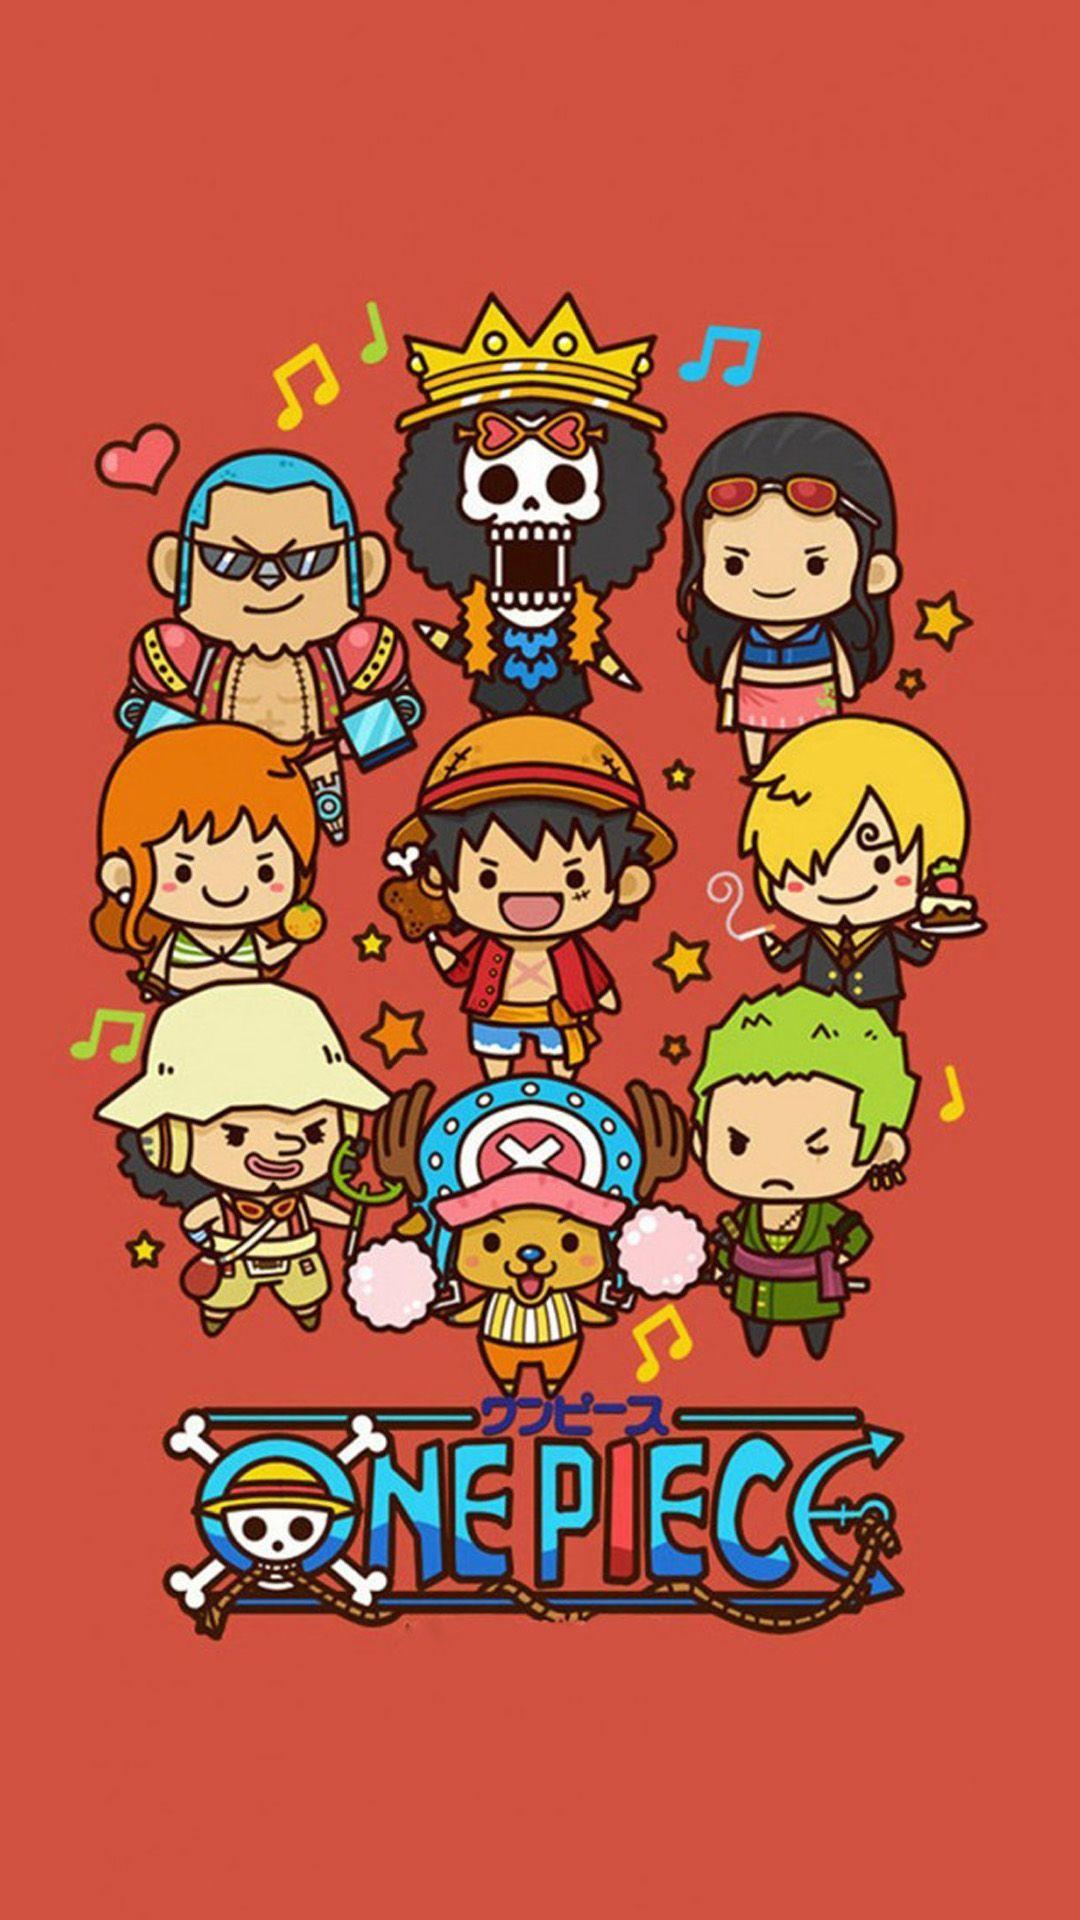 Cute Lovely One Piece Cartoon Poster iPhone 6 Wallpaper Download. iPhone Wallpaper, iPad wallpap. One piece wallpaper iphone, One piece cartoon, One piece anime